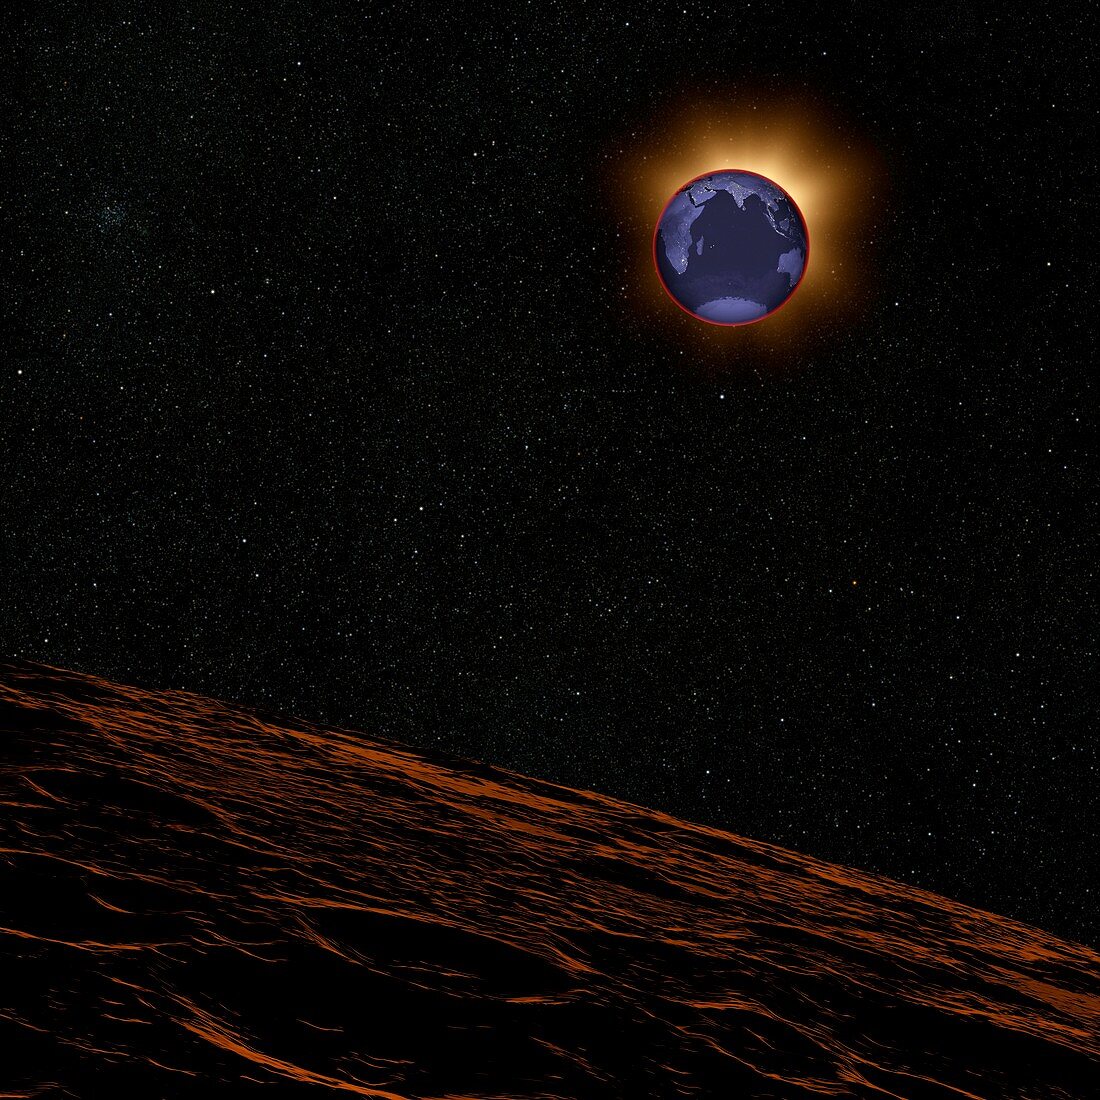 Lunar eclipse seen from the Moon,2011